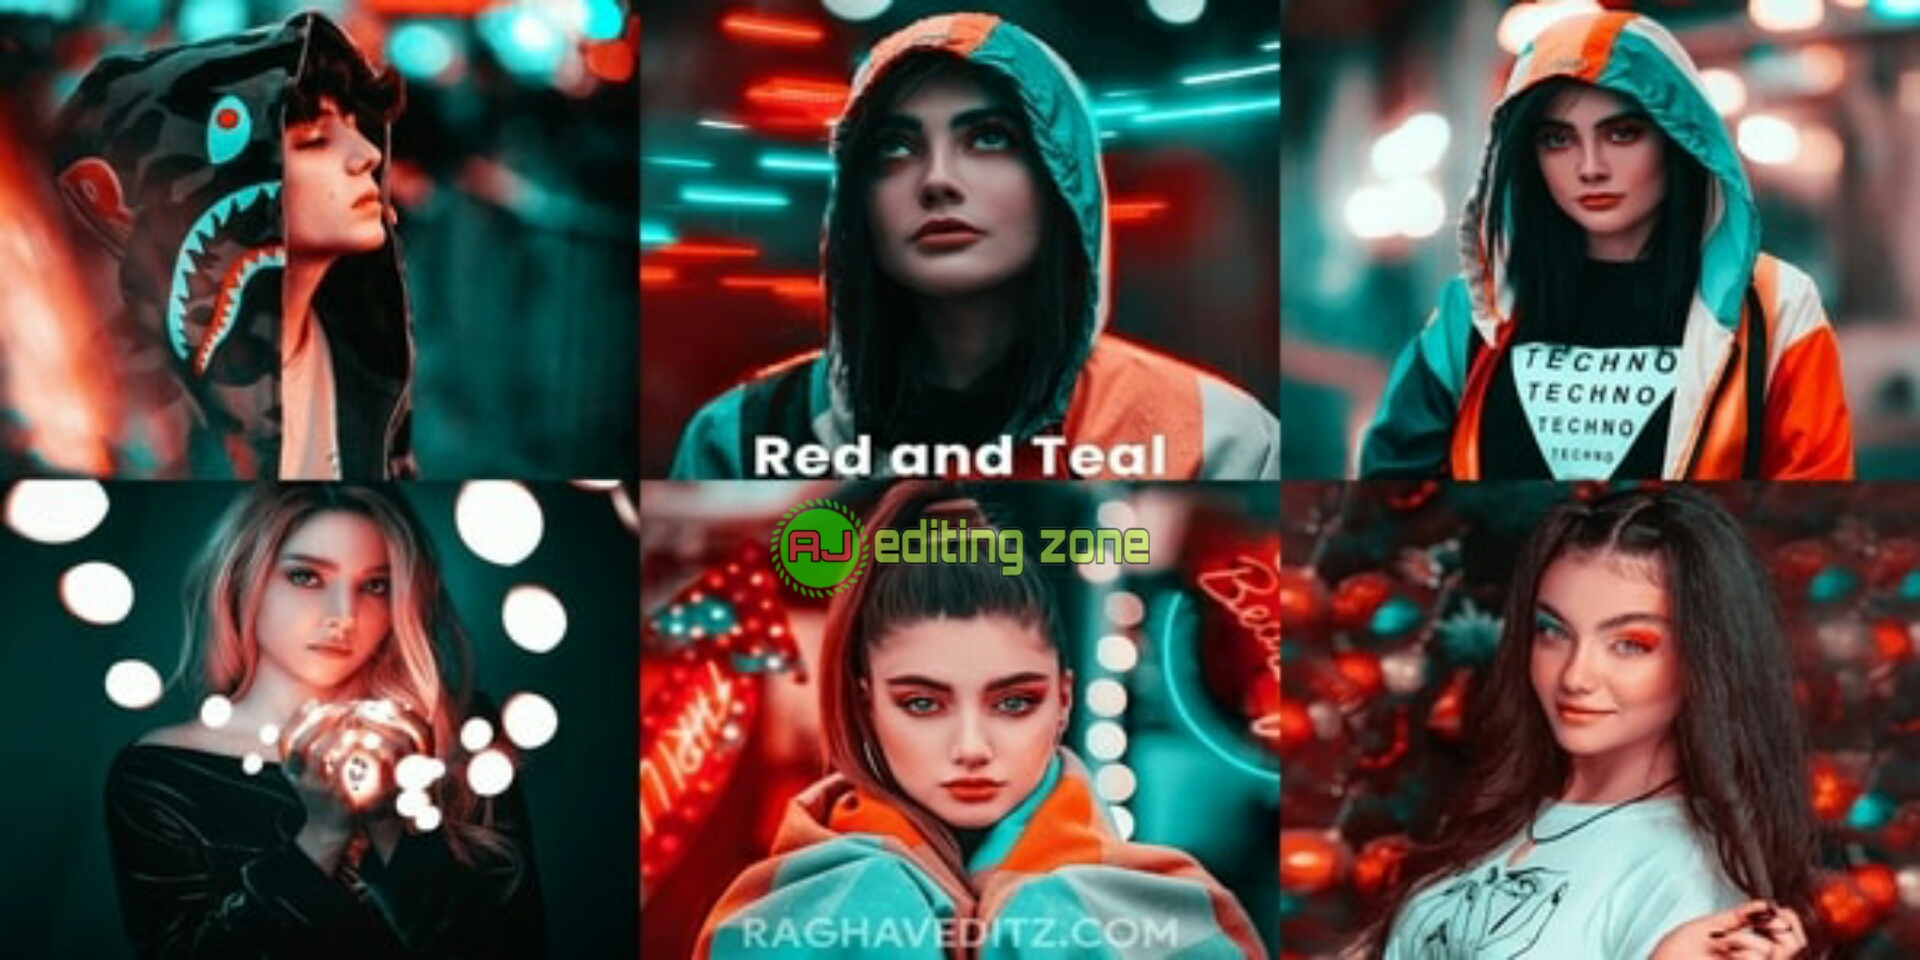 Red and Teal Lightroom Mobile Preset Free Download | New Lightroom Preset Download Free Preset | aj editing zone |